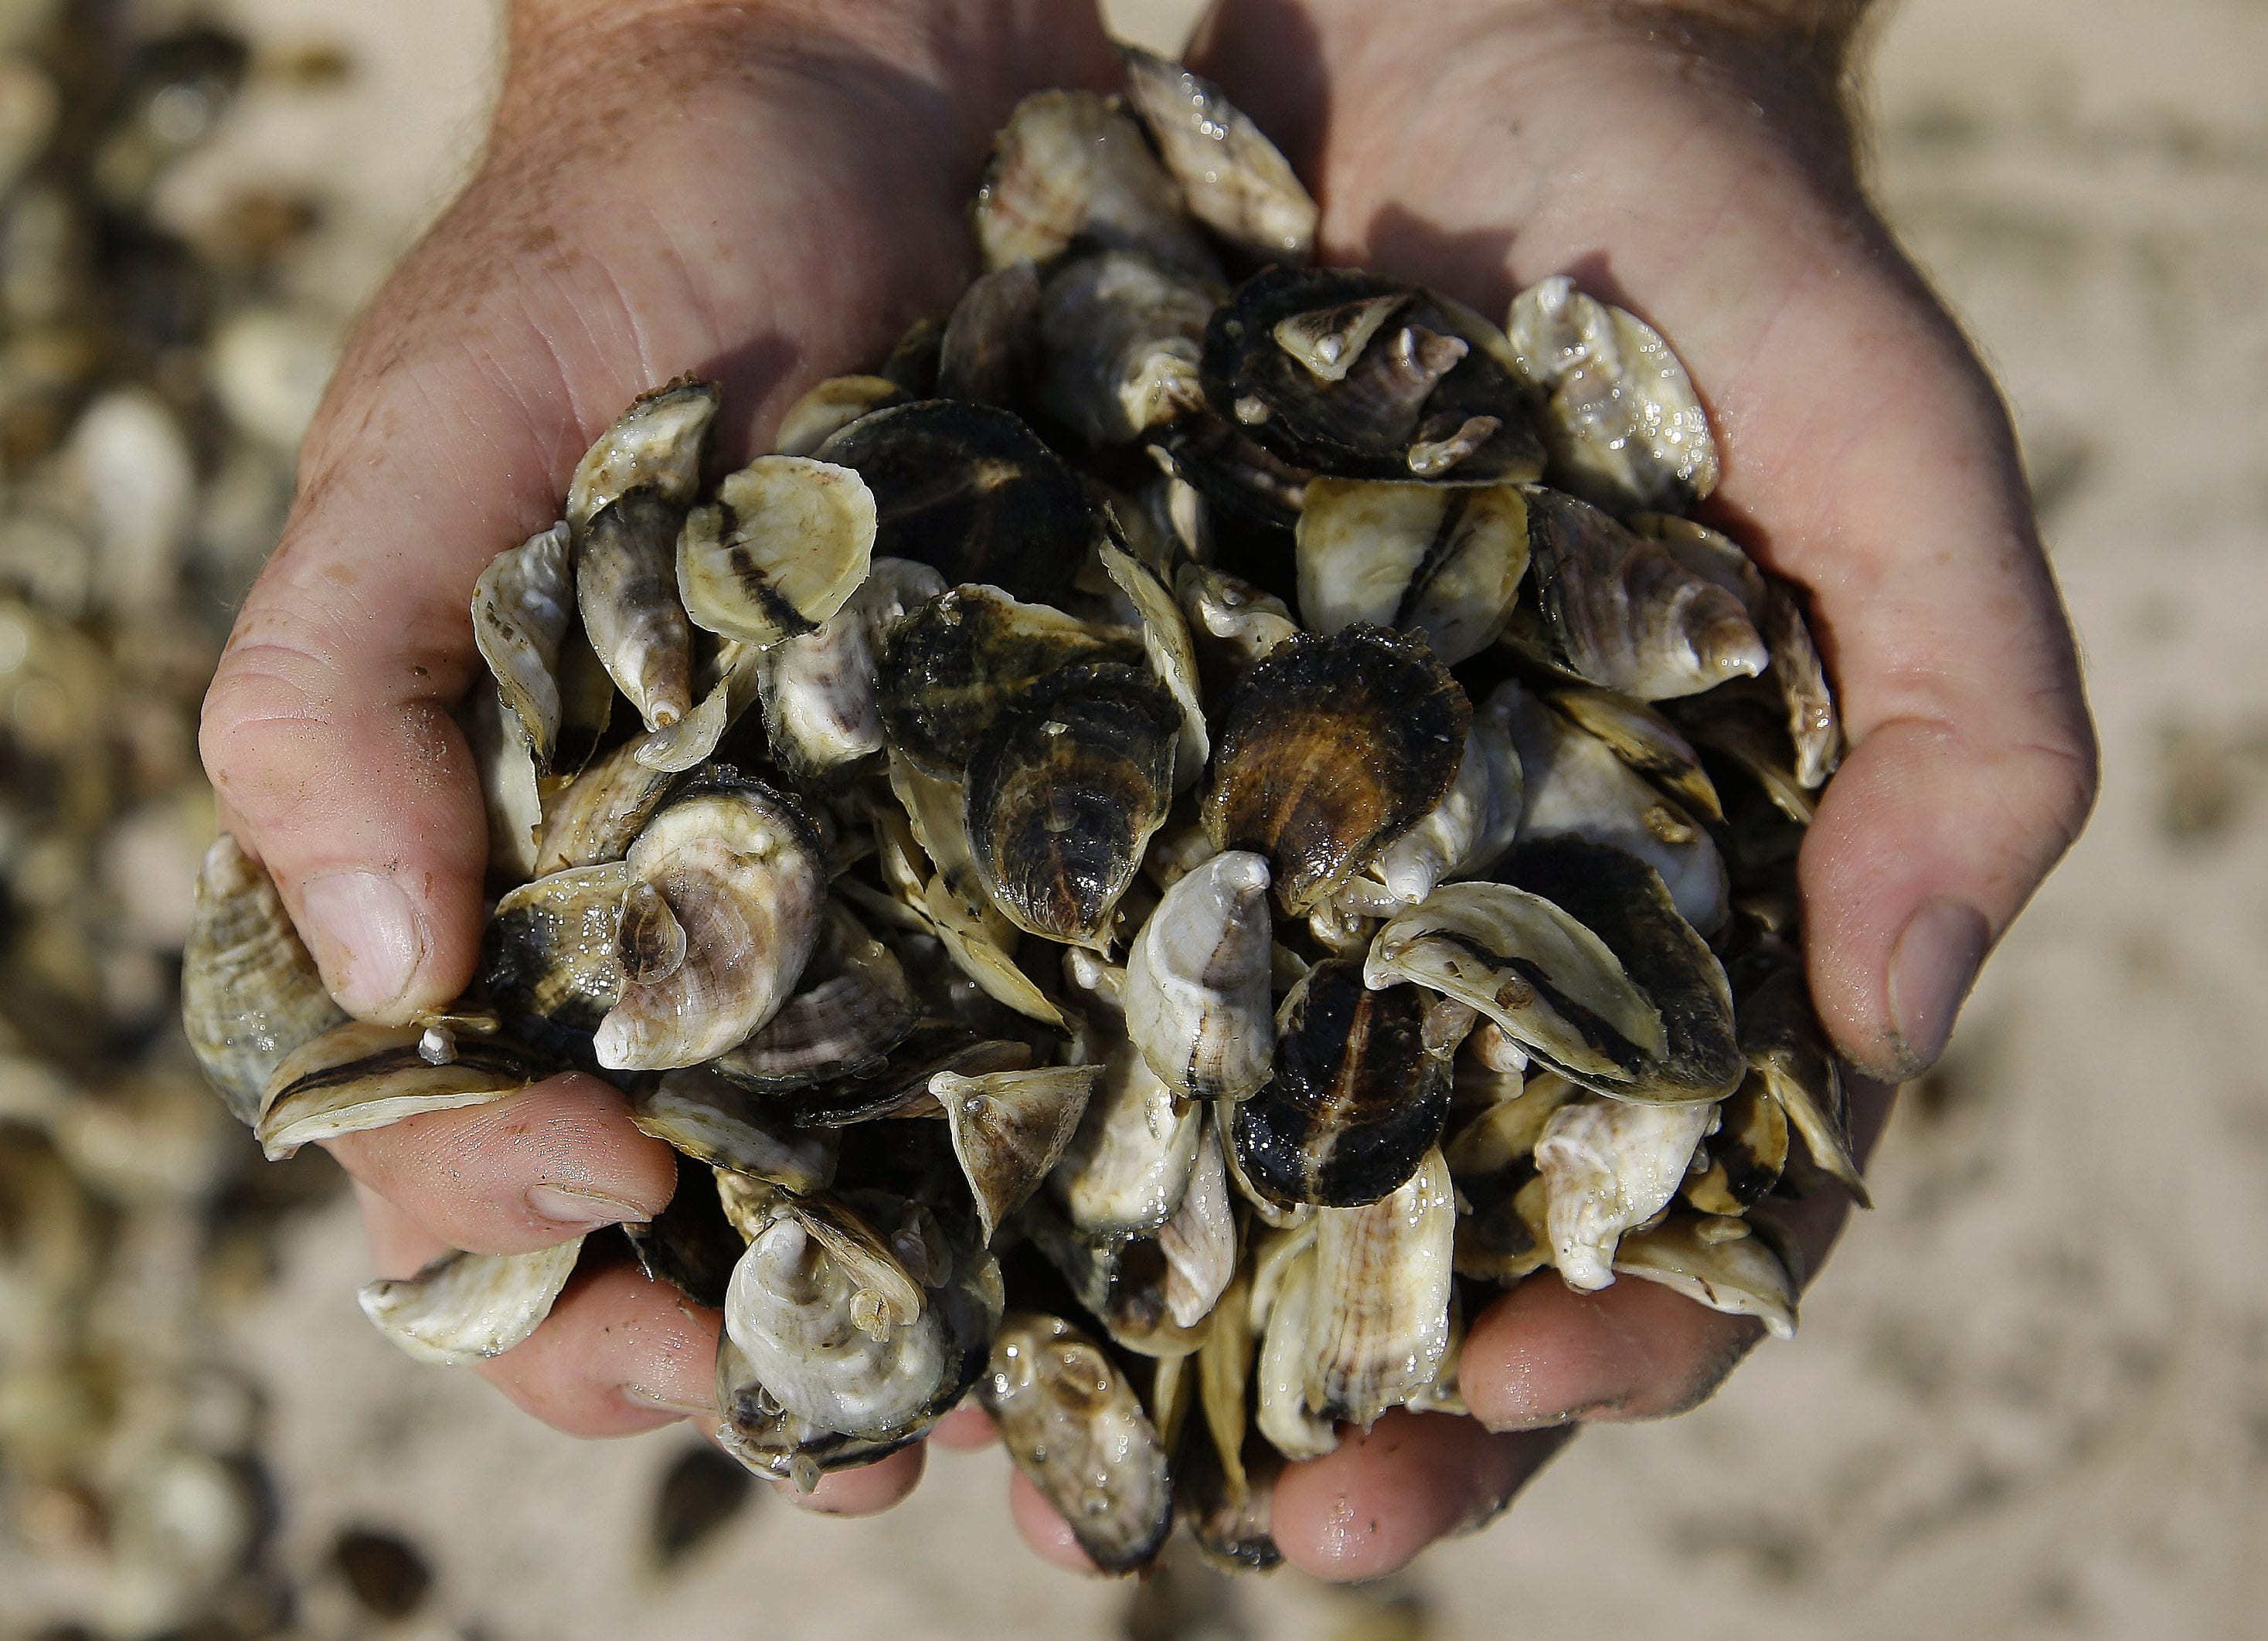 A report from the Centers of Disease Control says there was in increase in infections from vibrio bacteria found in raw shellfish such as oysters.